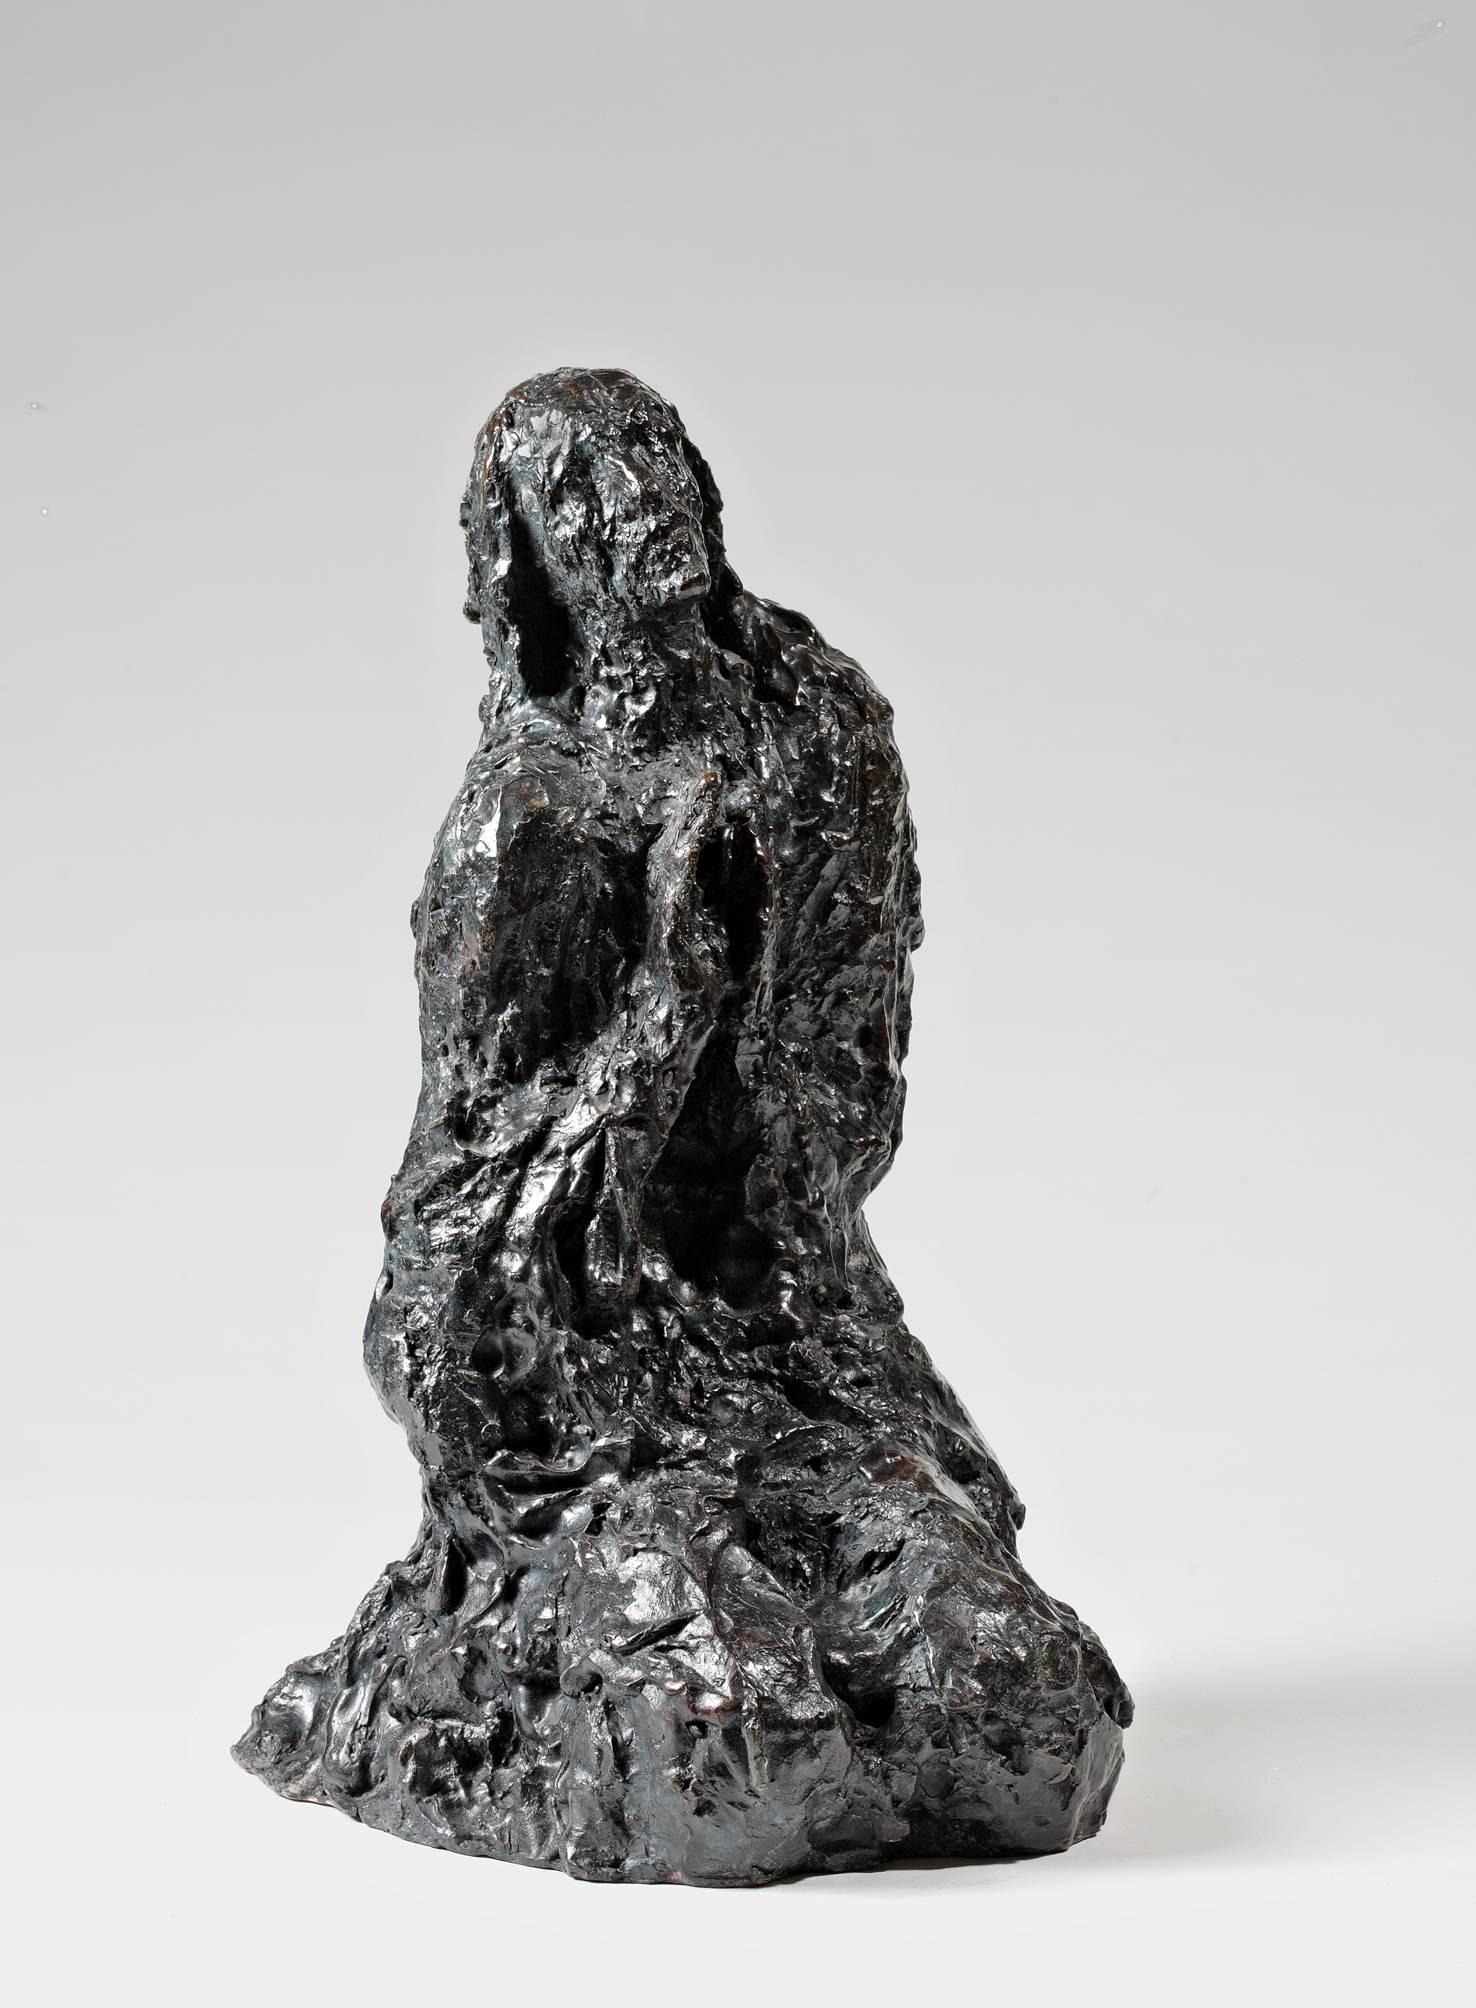 Bronze with black blue patina
Number 1/6
Valsuani foundry mark

Reproduced in the Raisonné Catalog of Edmond Moirignot, n°182, p.75

Bibliography and Exhibitions:
Moirignot sculptures Exhibiton André Pacitti gallery, Paris, 1968
Moirignot, marbres